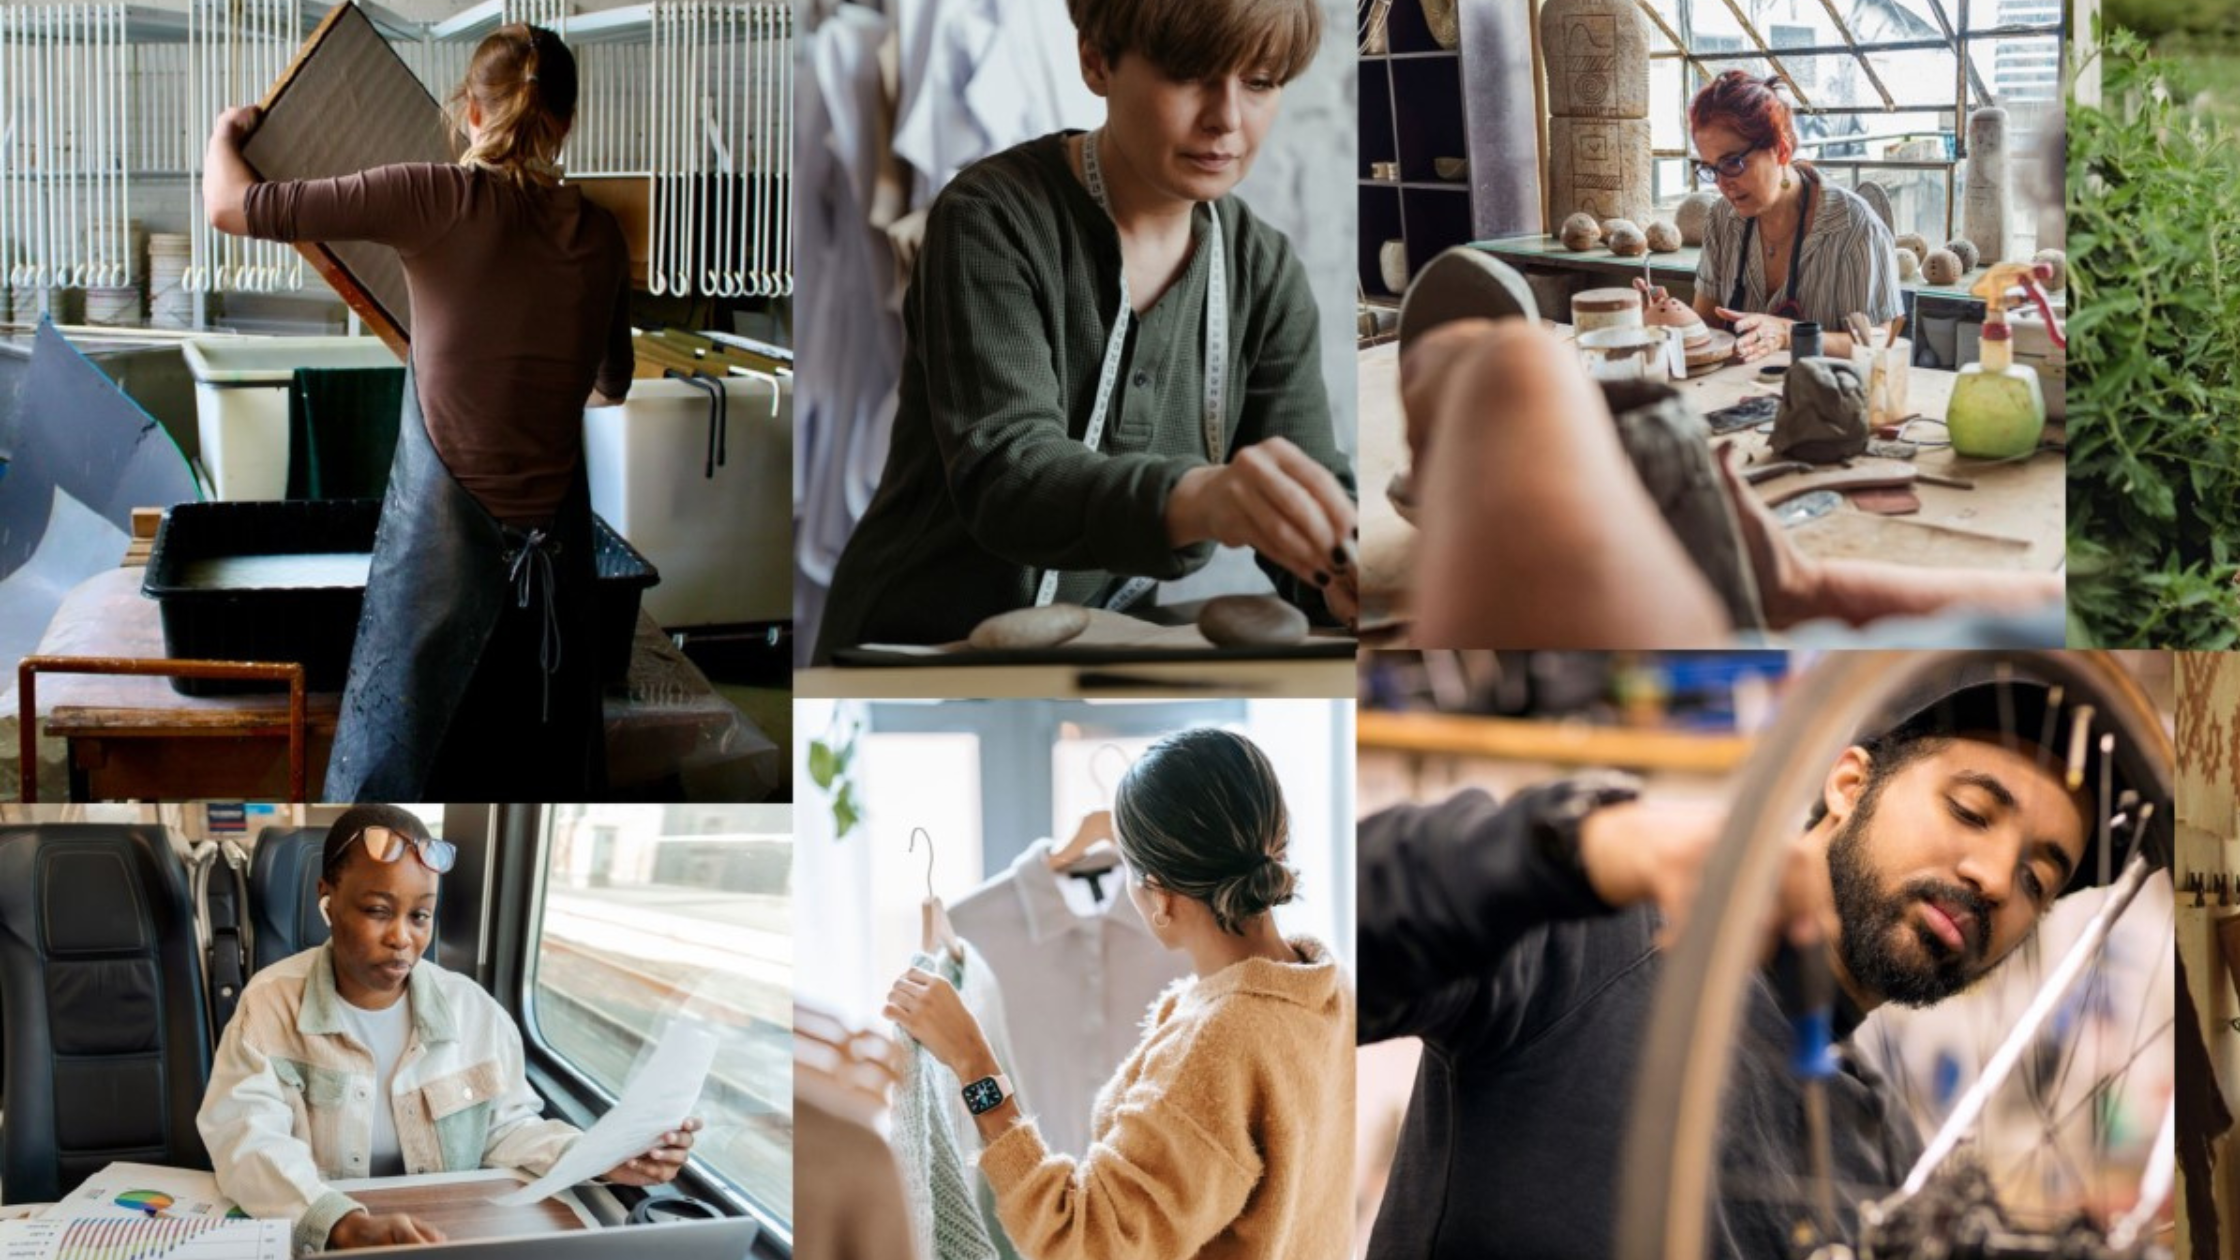 A series of images of various people working in different small business environments